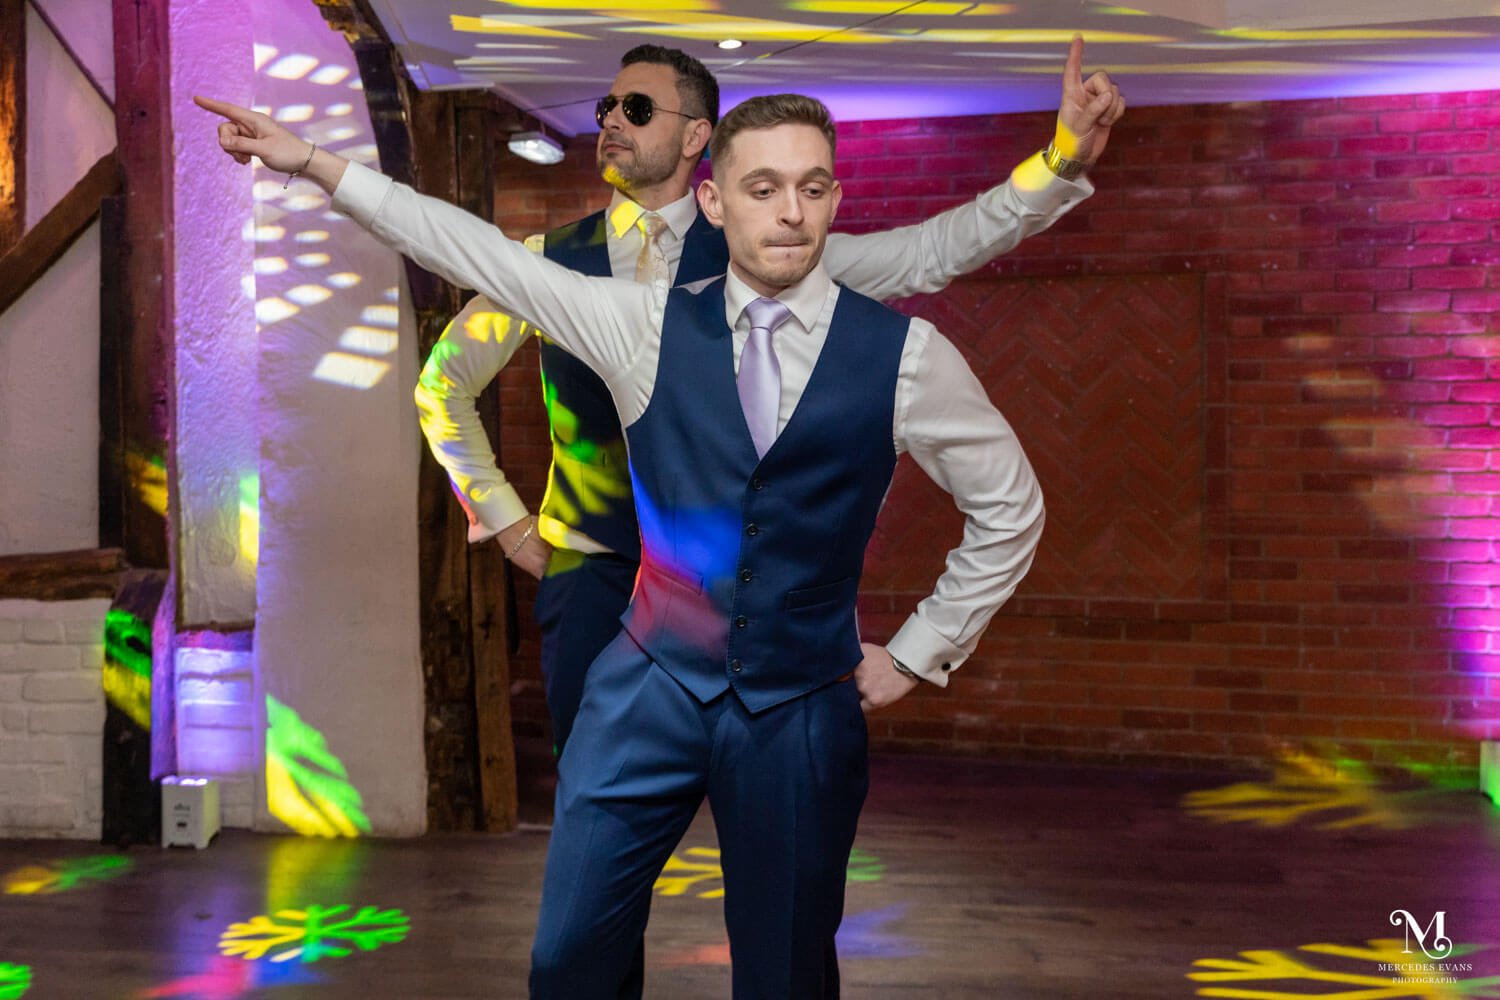 the groom and groomsman do a dance routine on the dance floor with coloured lights